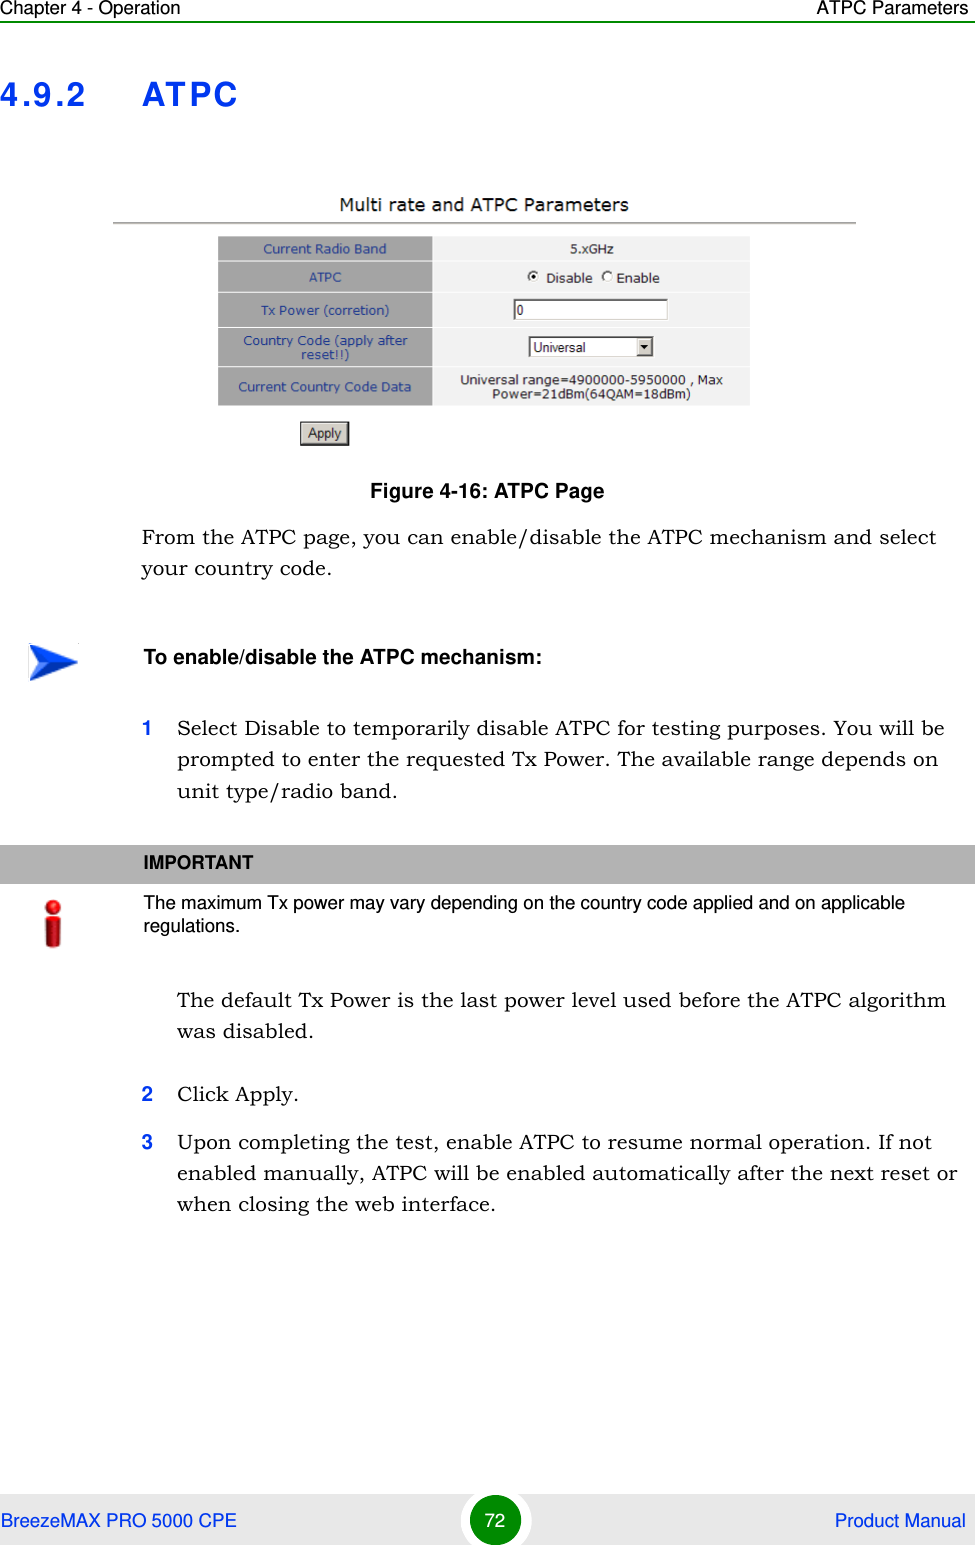 Chapter 4 - Operation ATPC ParametersBreezeMAX PRO 5000 CPE 72  Product Manual4.9.2 ATPCFrom the ATPC page, you can enable/disable the ATPC mechanism and select your country code.1Select Disable to temporarily disable ATPC for testing purposes. You will be prompted to enter the requested Tx Power. The available range depends on unit type/radio band.The default Tx Power is the last power level used before the ATPC algorithm was disabled.2Click Apply.3Upon completing the test, enable ATPC to resume normal operation. If not enabled manually, ATPC will be enabled automatically after the next reset or when closing the web interface.Figure 4-16: ATPC PageTo enable/disable the ATPC mechanism:IMPORTANTThe maximum Tx power may vary depending on the country code applied and on applicable regulations.